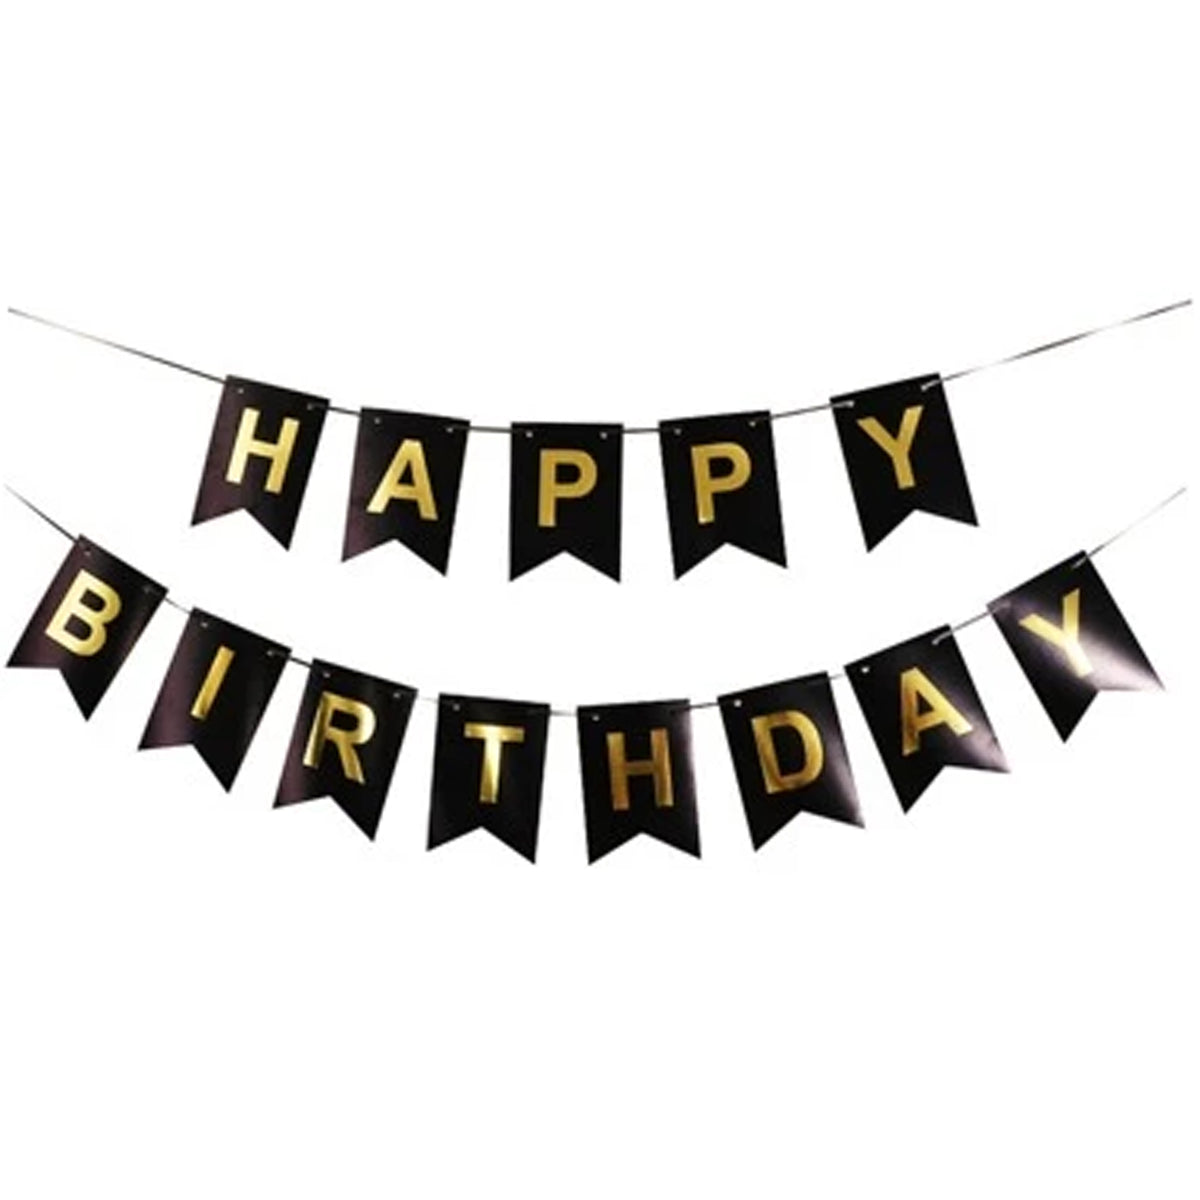 Happy Birthday Banner With Shiny Gold Letters For Birthday Party Boys Girl Baby Shower Decoration Wedding Bunting Garland Banner